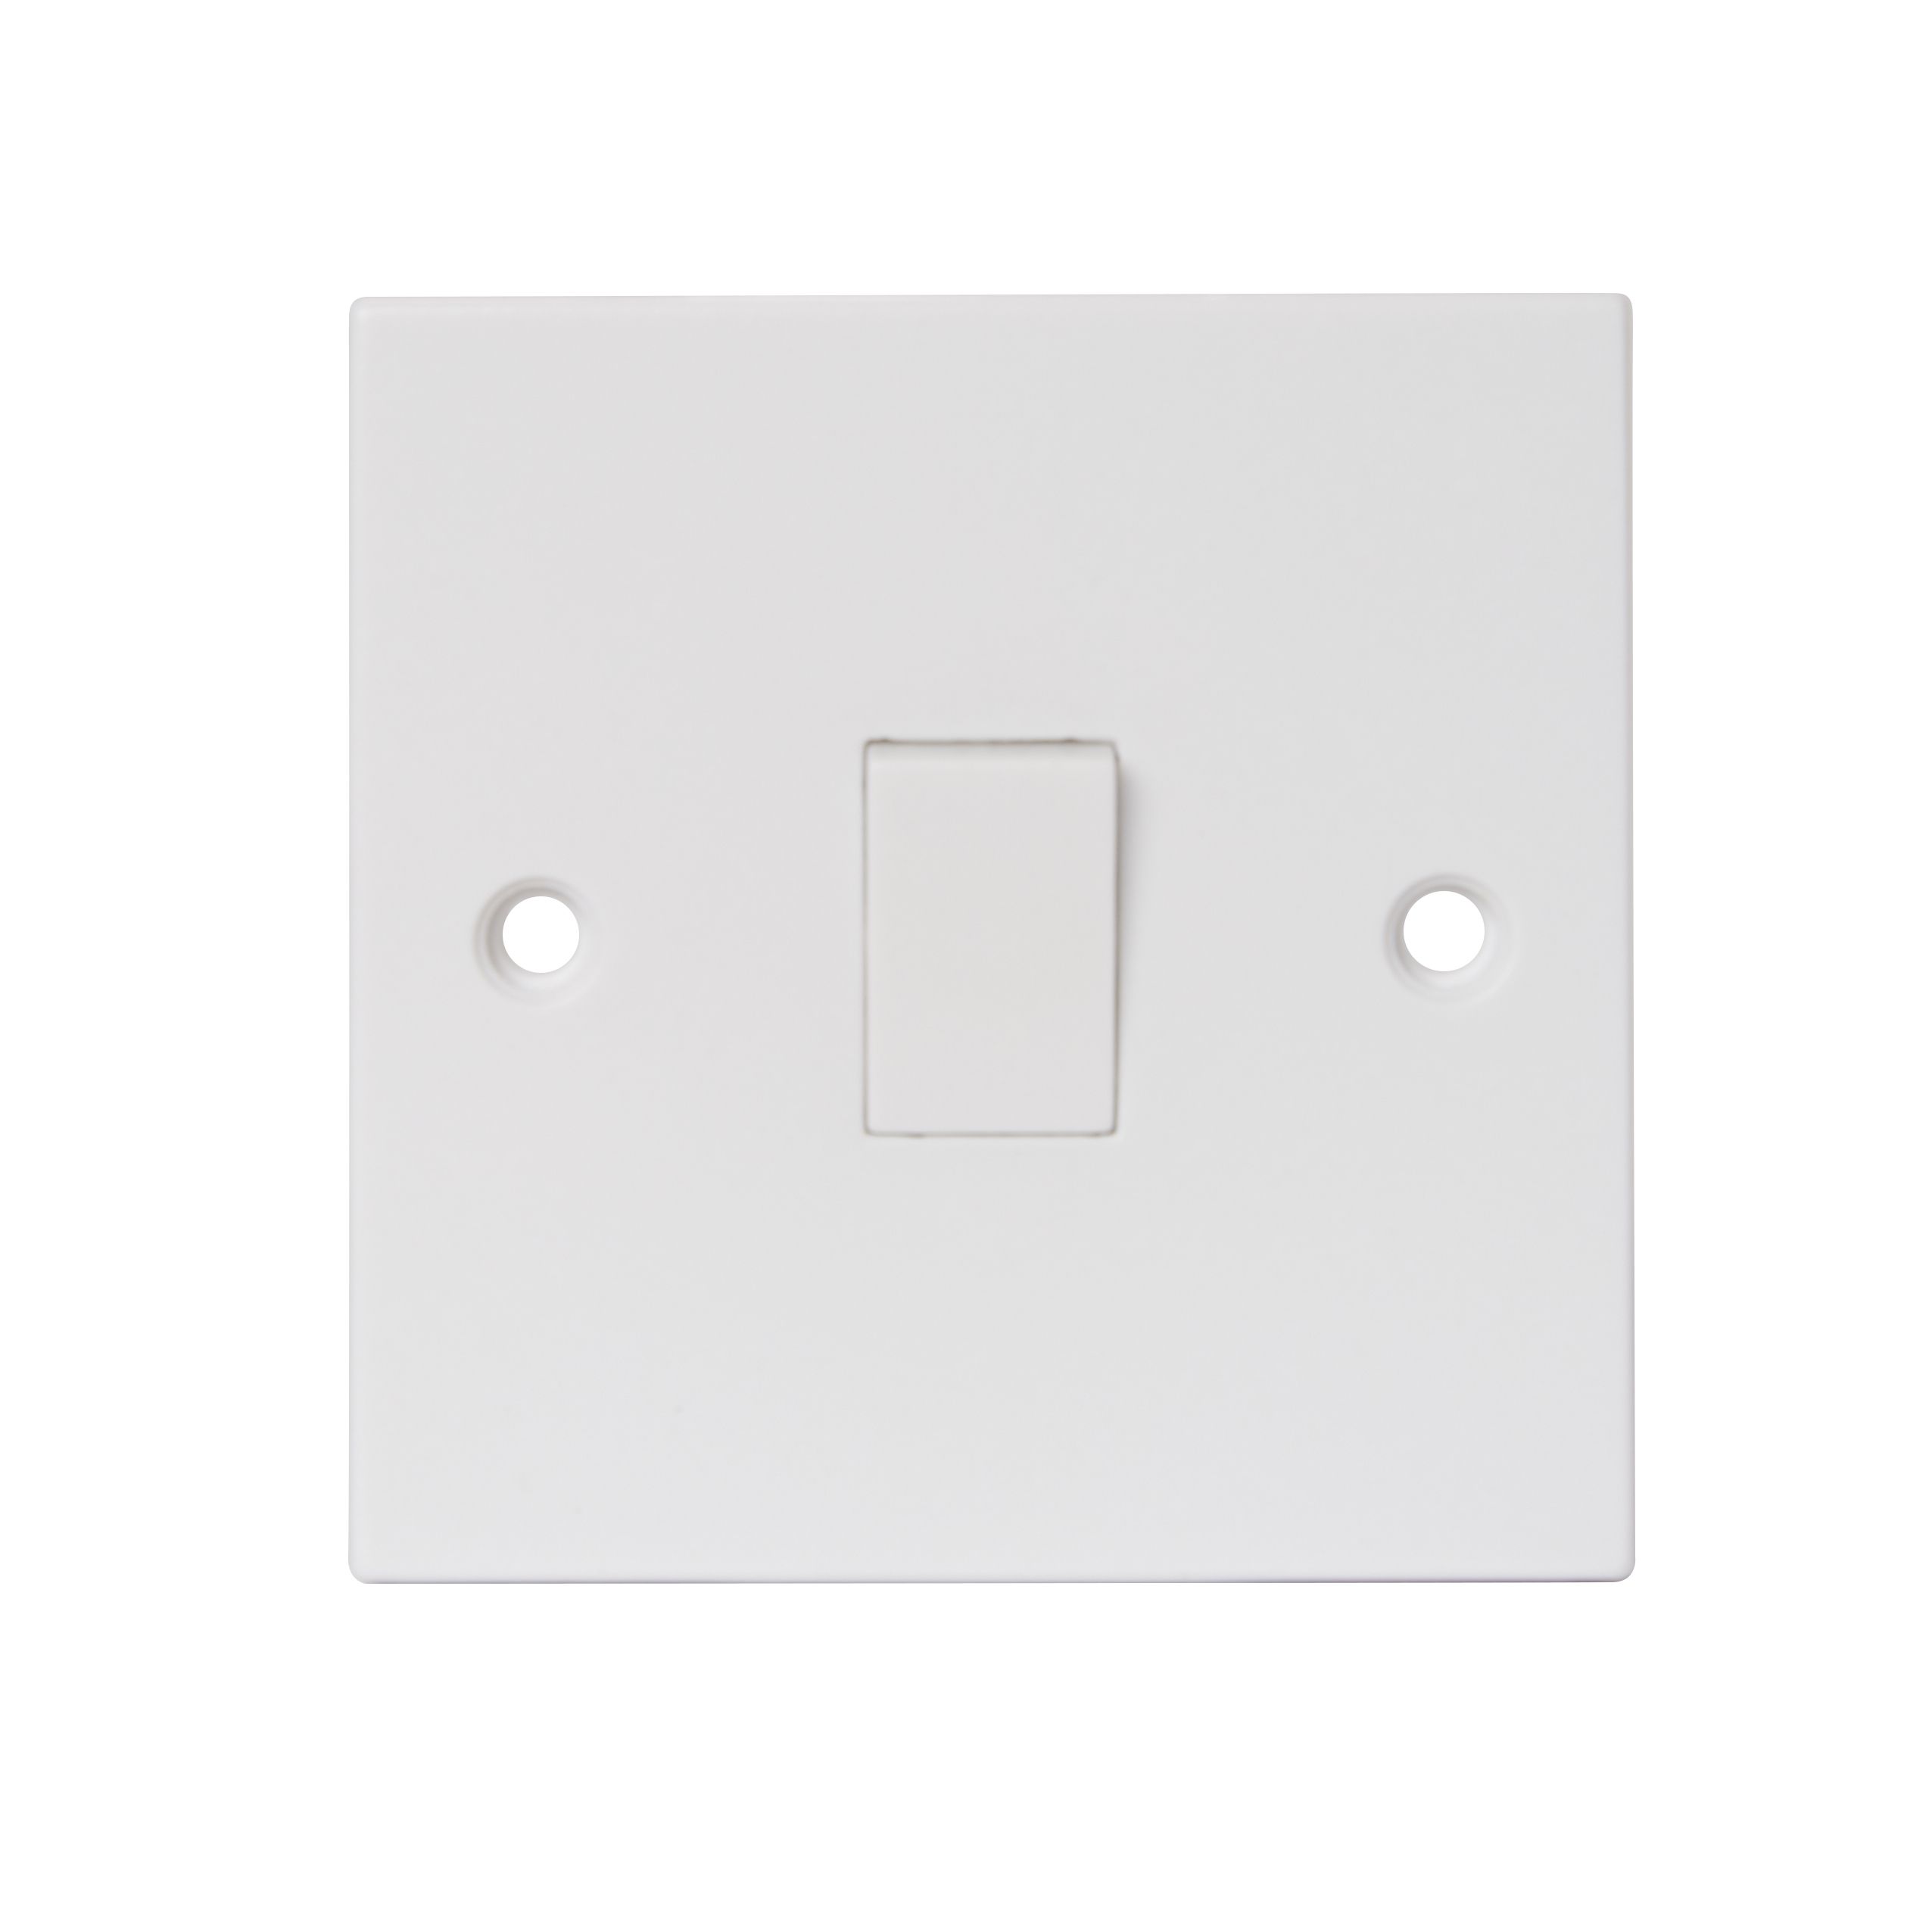 Power Pro 13A 2 way White Single Light Switch, Pack of 5